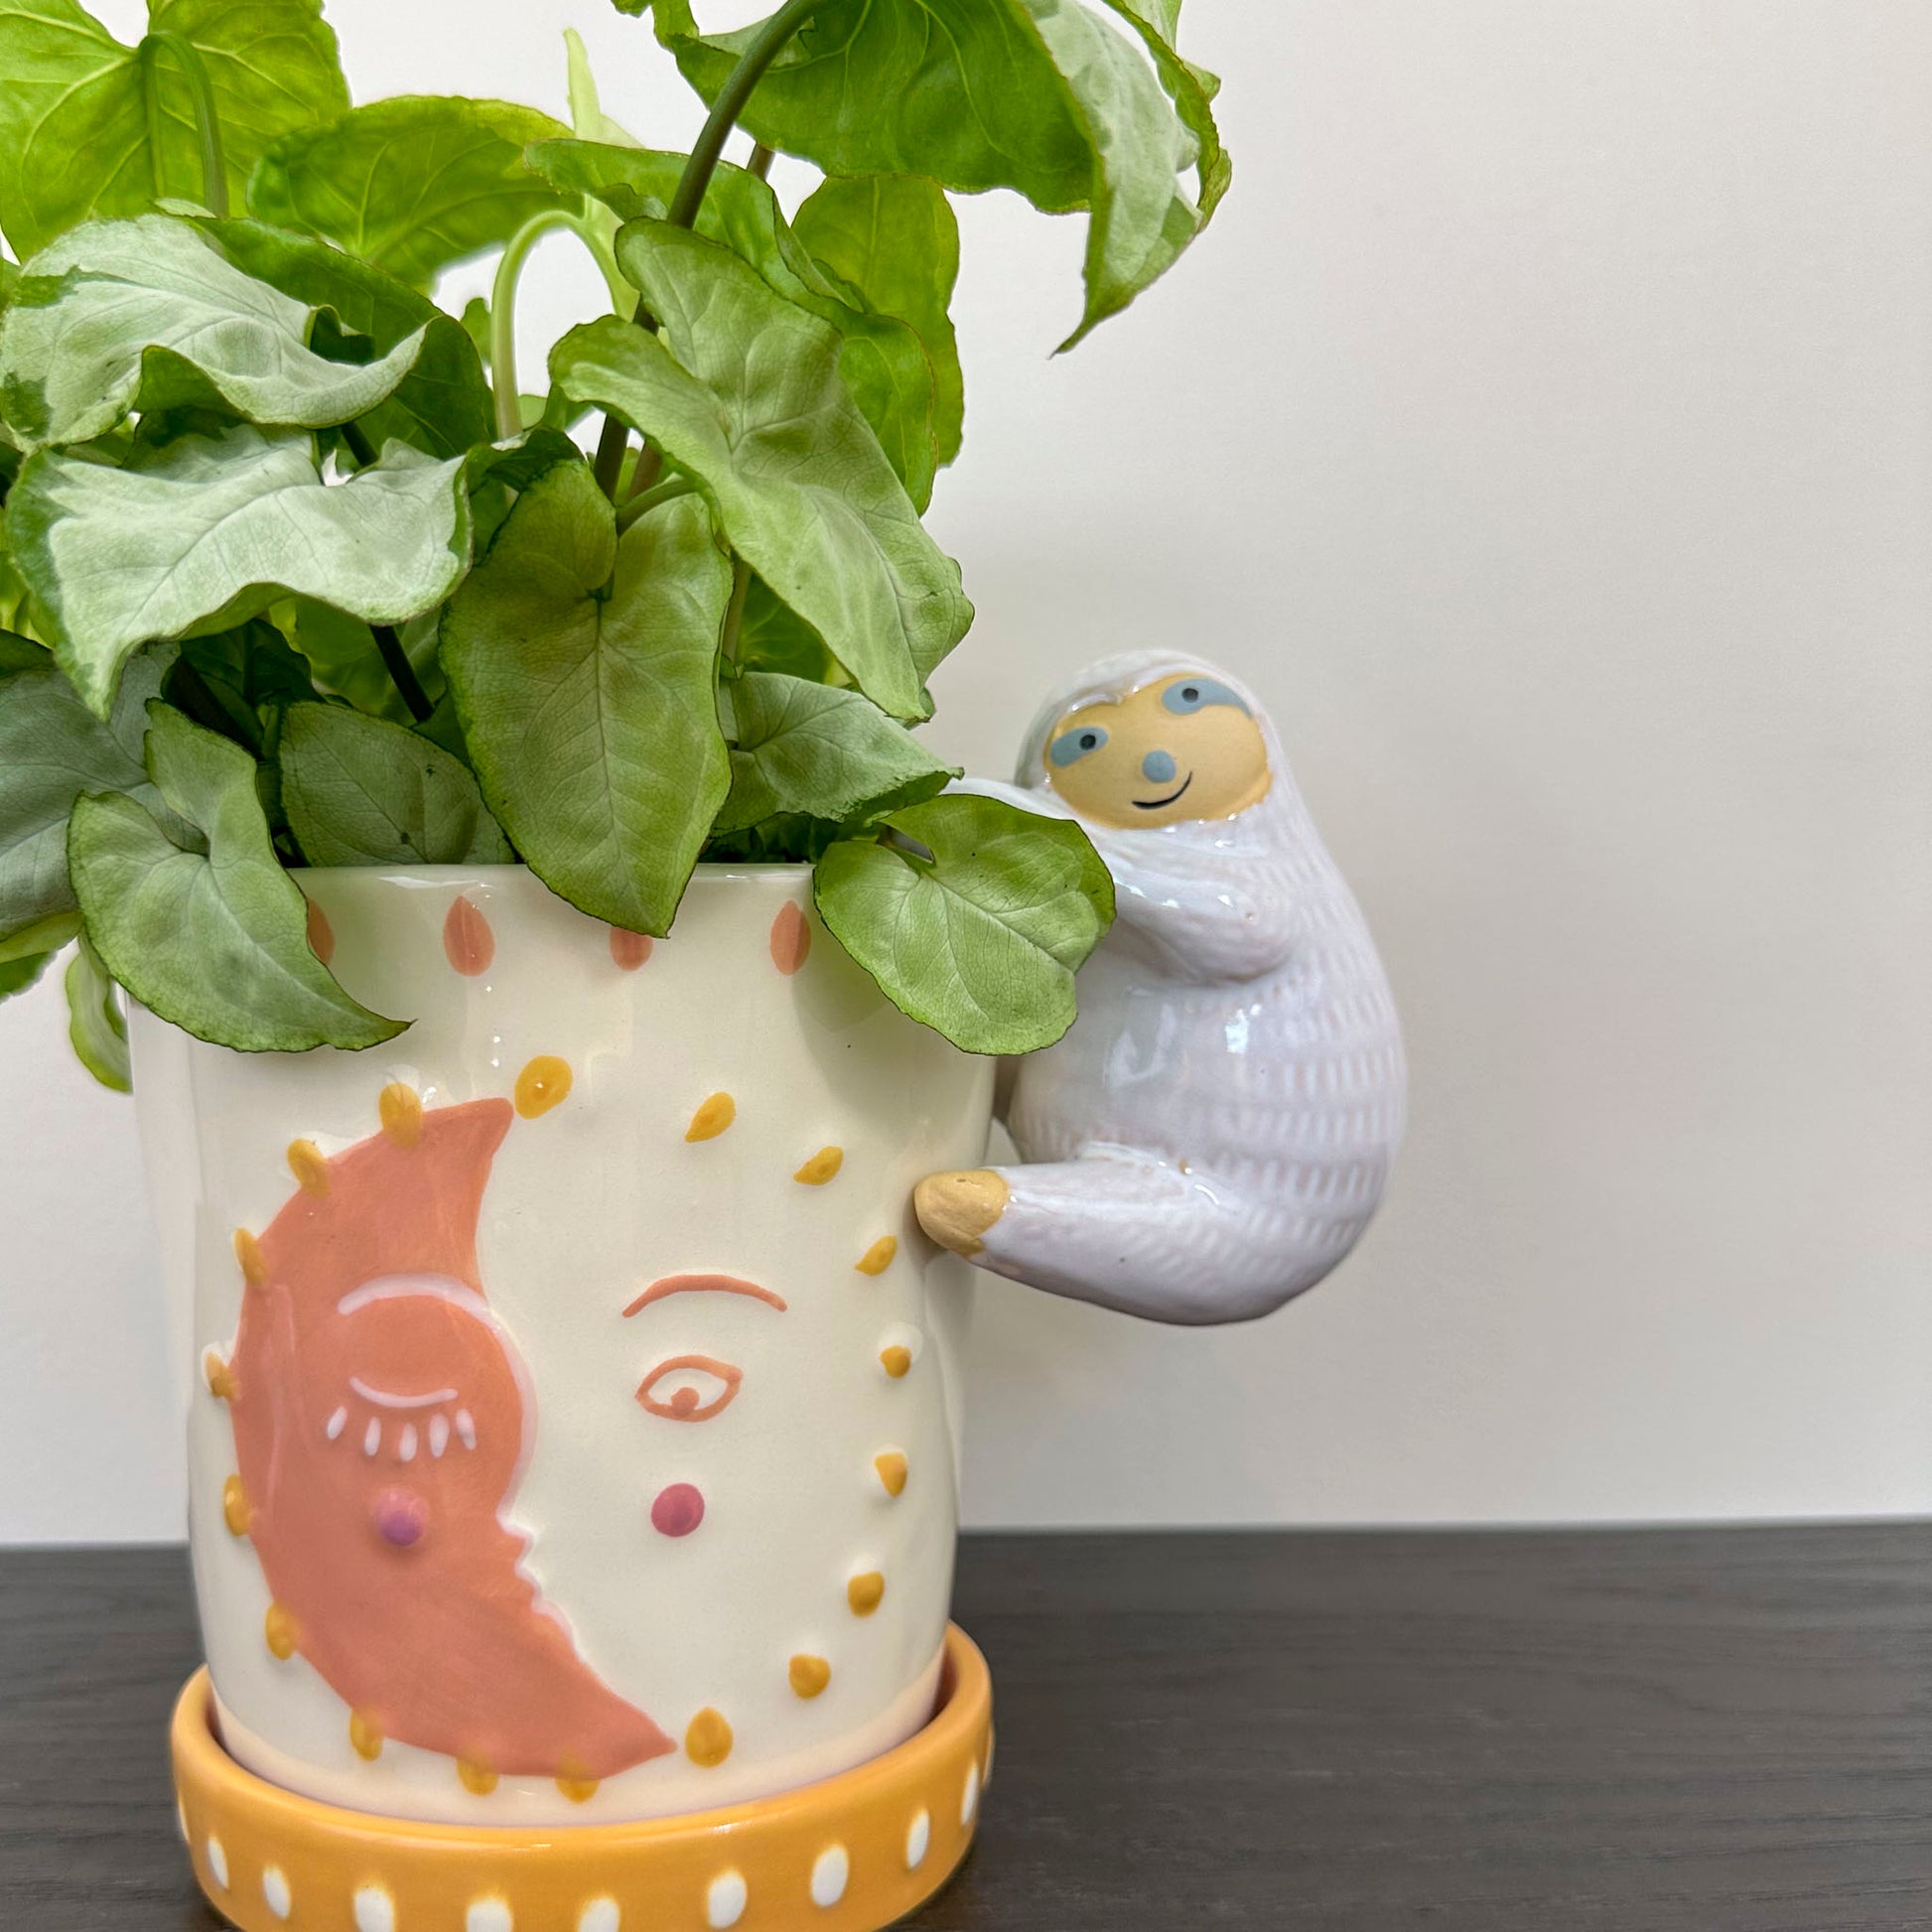 Sloth planter hanger hanging from a pot